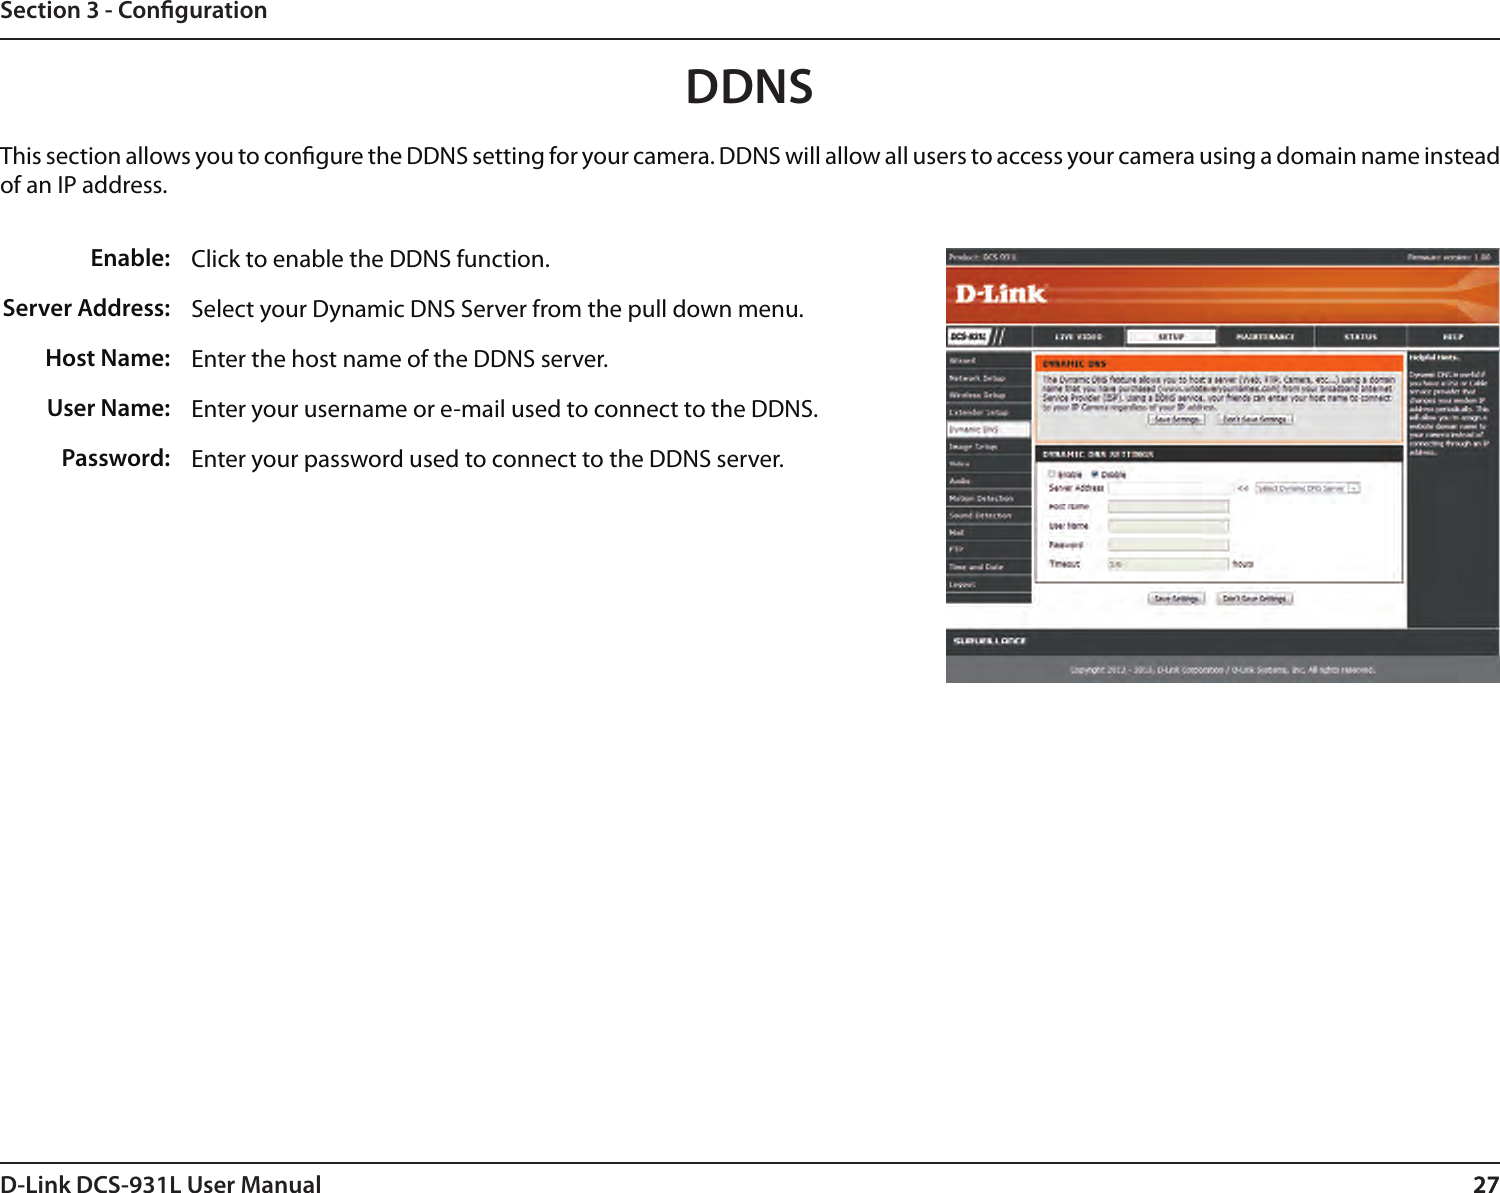 27D-Link DCS-931L User Manual 27Section 3 - CongurationClick to enable the DDNS function.Select your Dynamic DNS Server from the pull down menu.Enter the host name of the DDNS server.Enter your username or e-mail used to connect to the DDNS.Enter your password used to connect to the DDNS server.Enable:Server Address: Host Name:User Name:Password:DDNS This section allows you to congure the DDNS setting for your camera. DDNS will allow all users to access your camera using a domain name instead of an IP address.